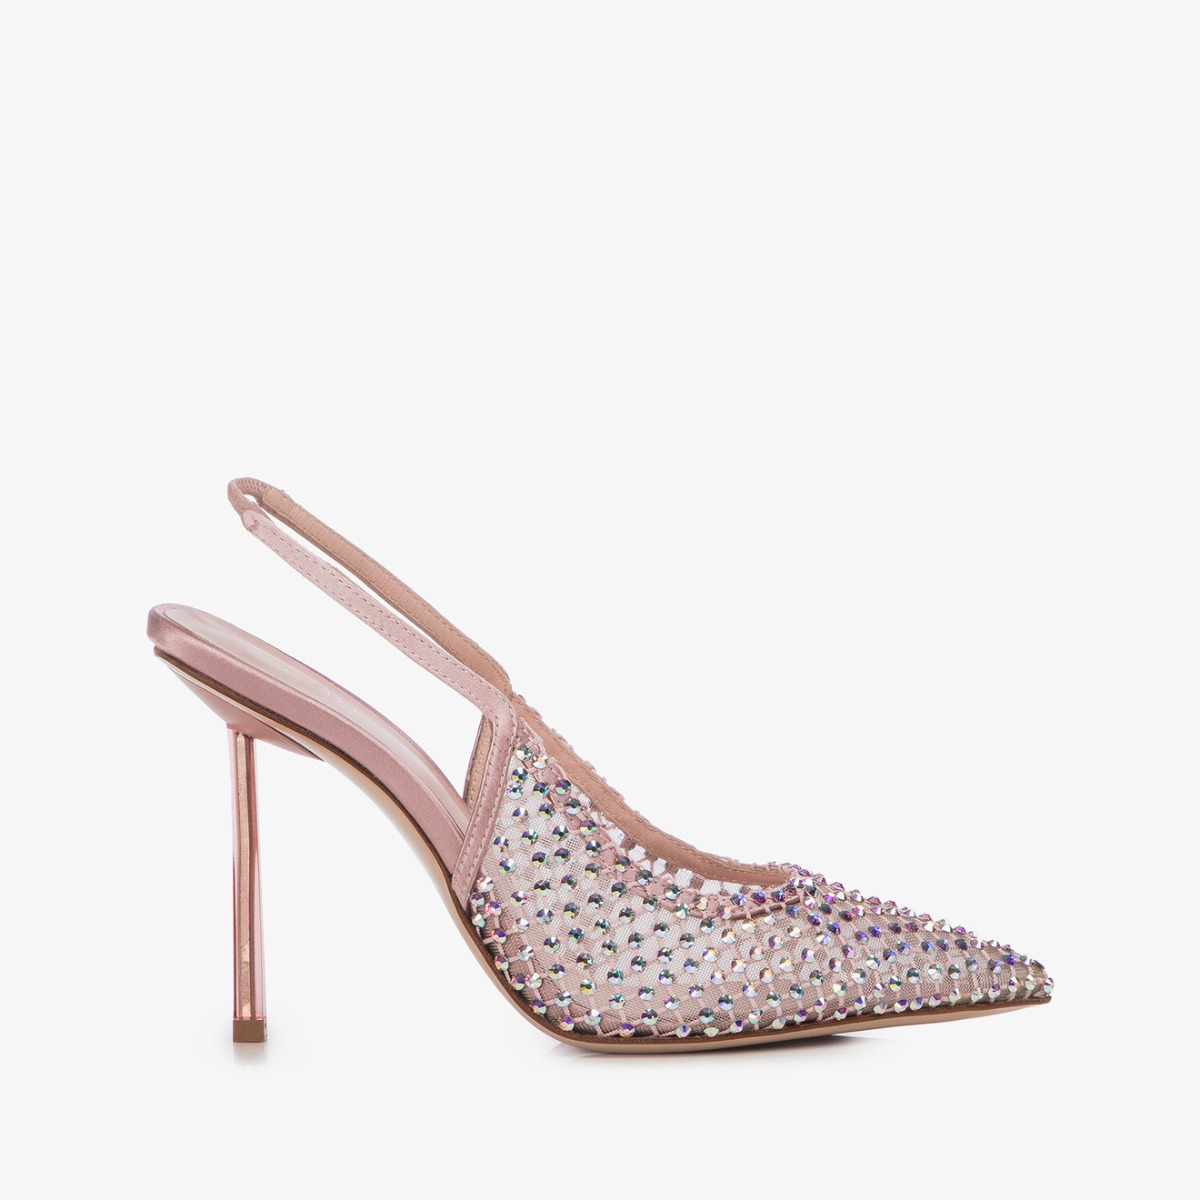 Paris pink fishnet slingback with Crystals - Le Silla